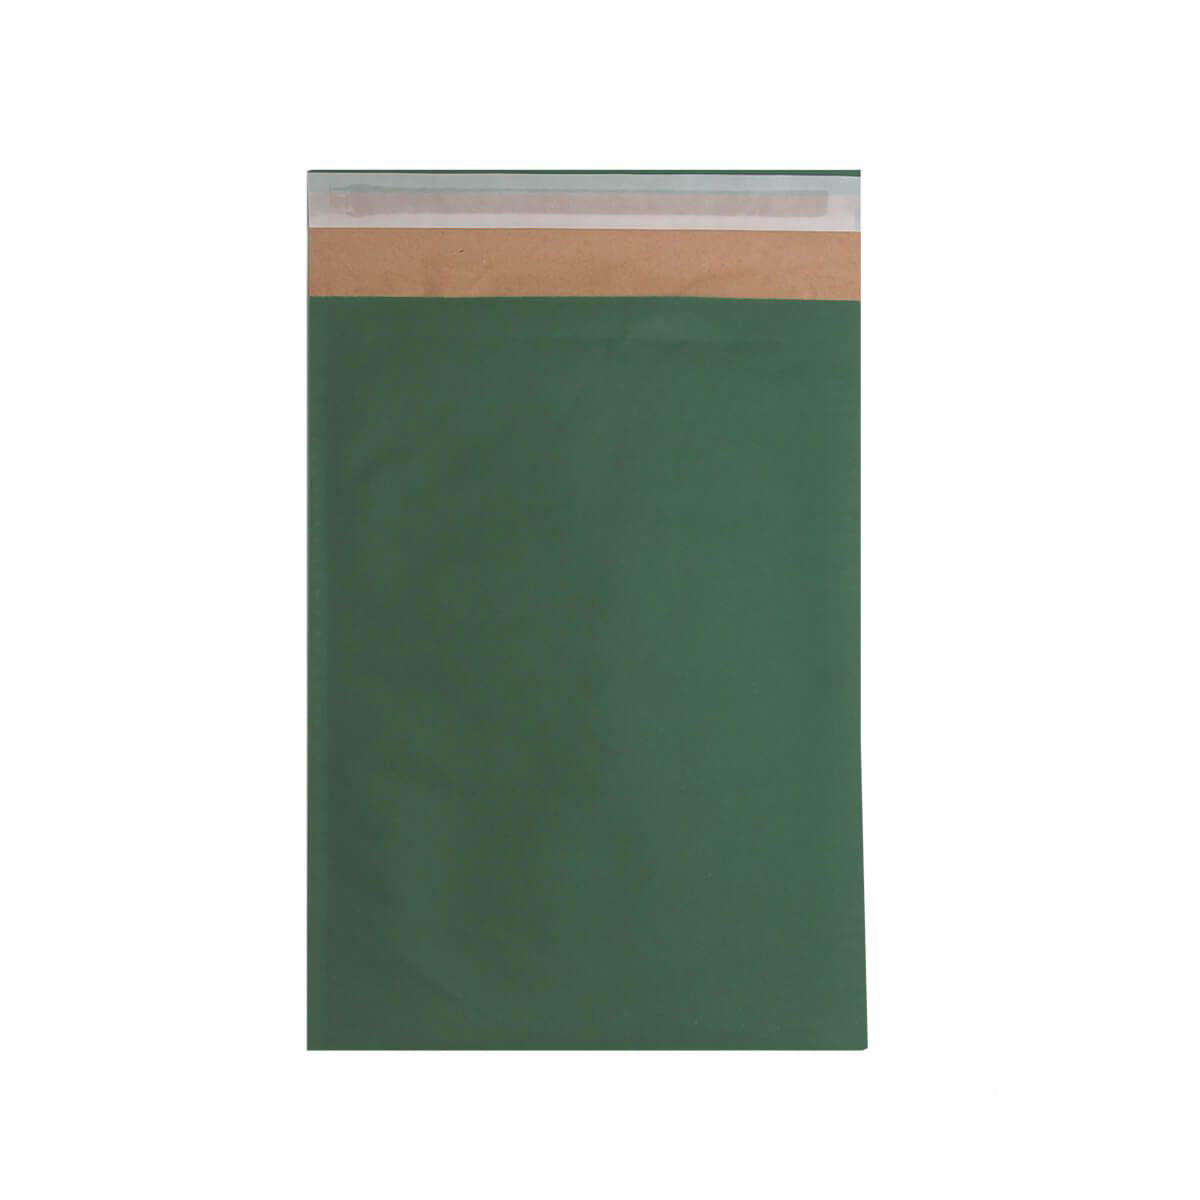 215mm x 150mm Eco Friendly Recyclable Dark Green Padded Envelope [Qty 100] - All Colour Envelopes